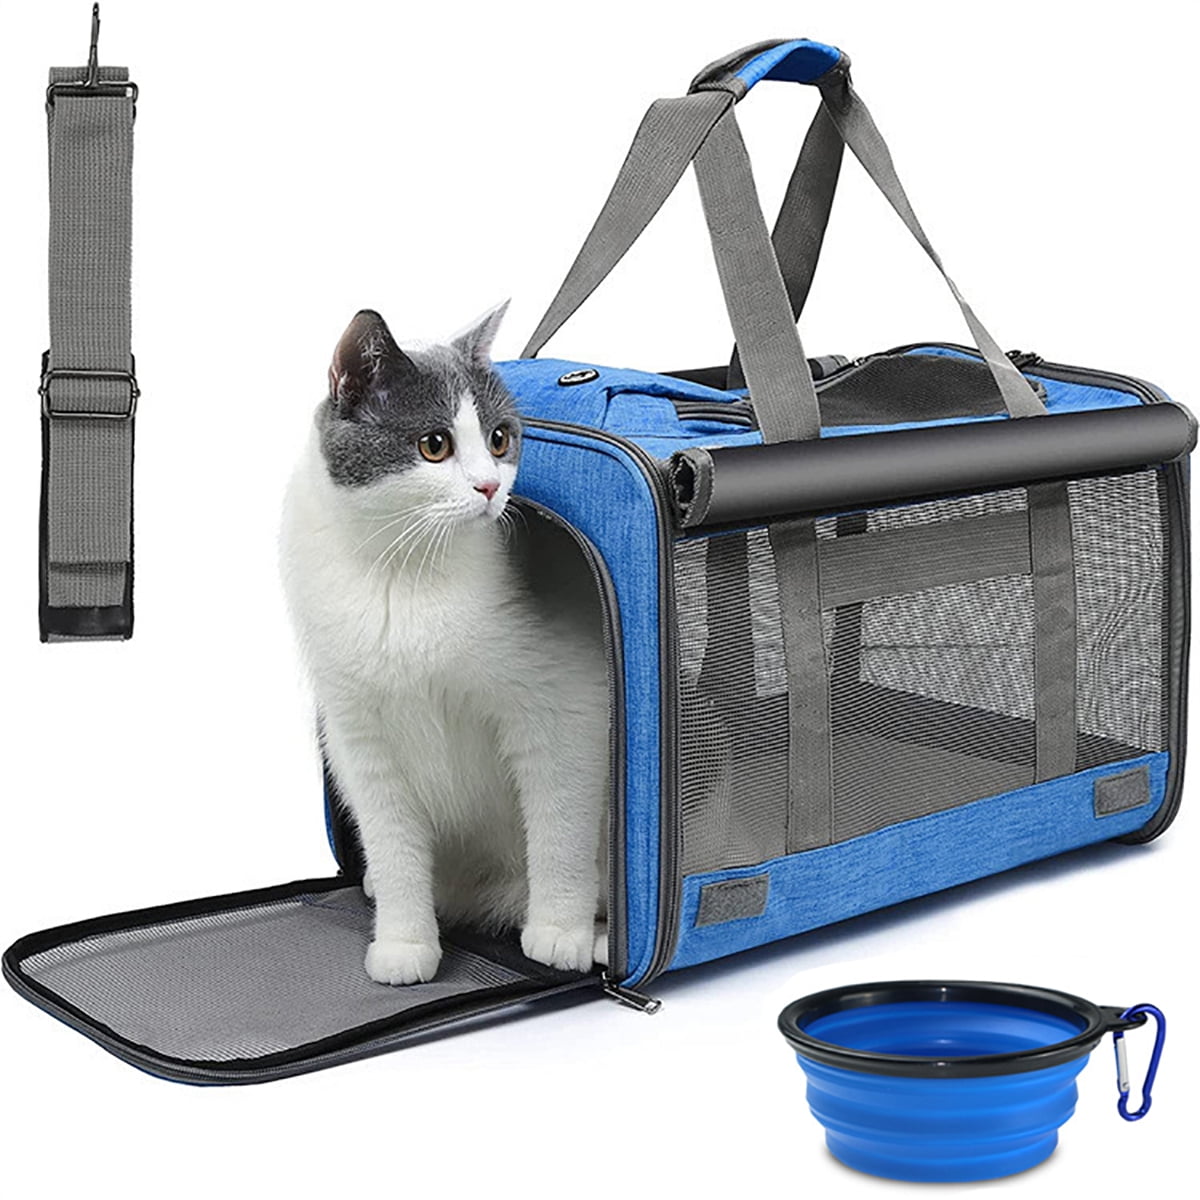 Cat Carrier Pet Large Cat Carrier for Small Medium Dogs Cats under